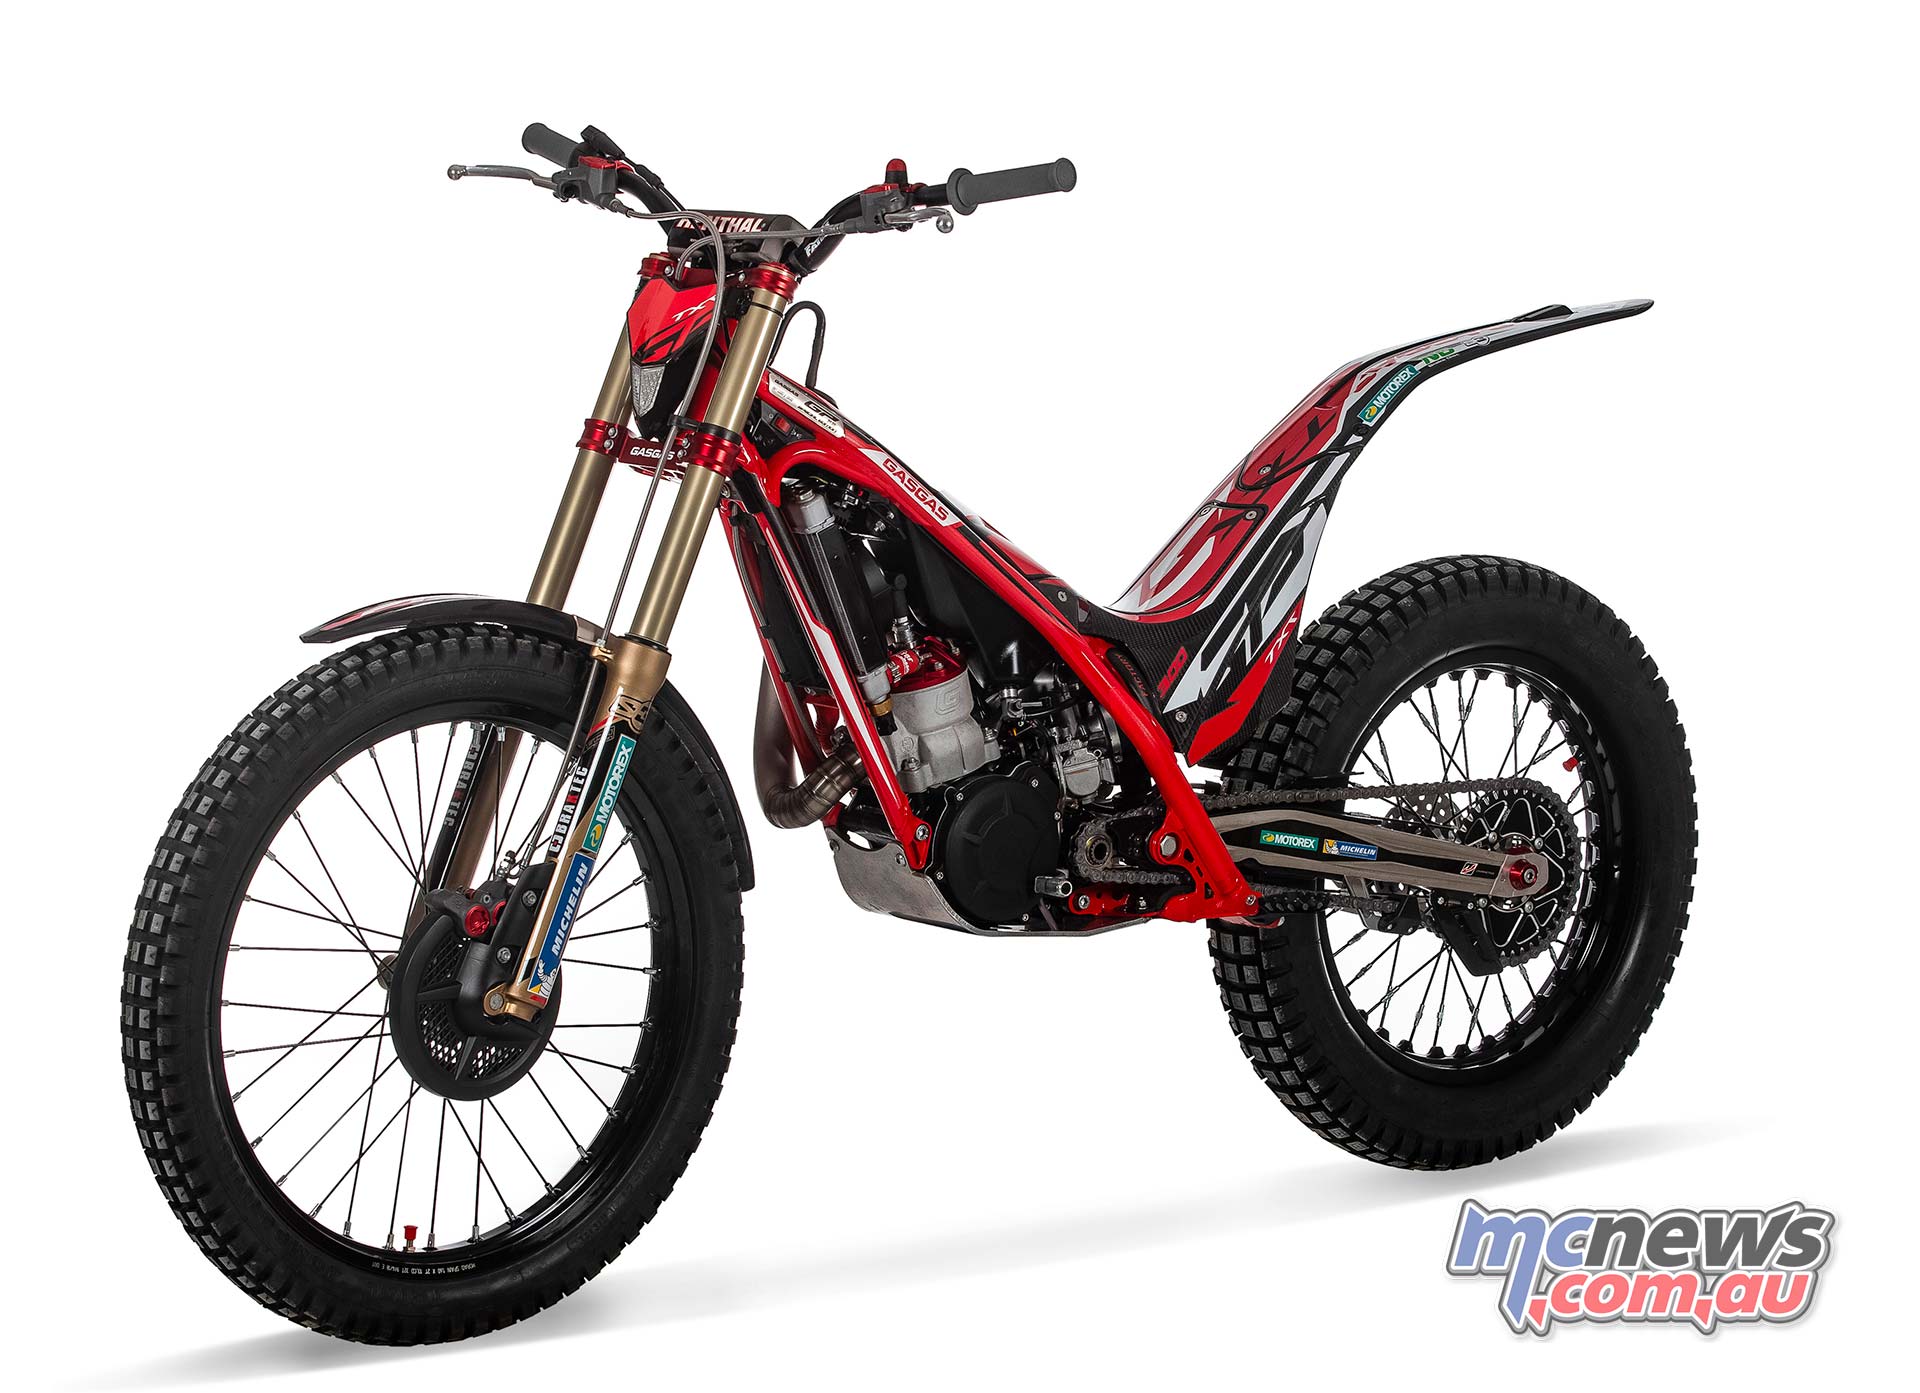 New Flagship Factory Gasgas Txt Gp Trials Line Up Motorcycle News Sport And Reviews